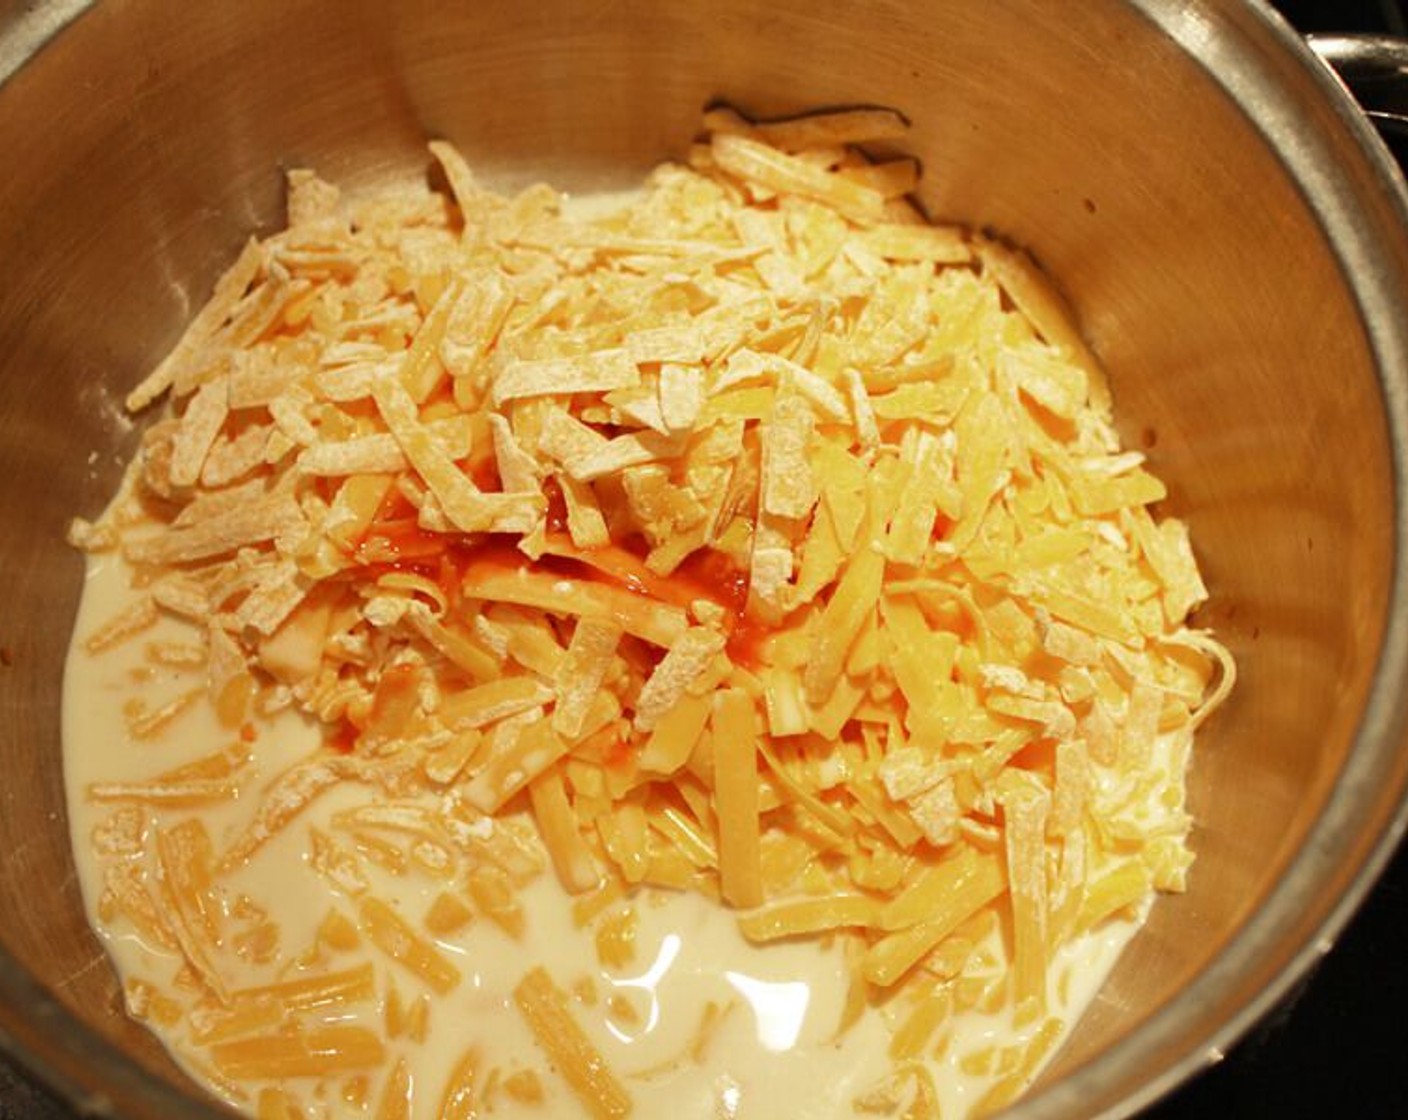 step 8 Now, make the cheesy sauce. In a medium sized bowl, toss Shredded Cheddar Cheese (2 cups) with Corn Starch (1 Tbsp). Toss until well coated. Transfer cheese mixture to medium sauce pan. Add Evaporated Milk (8 fl oz) and Hot Sauce (1/2 Tbsp). Cook over low heat, stirring constantly.